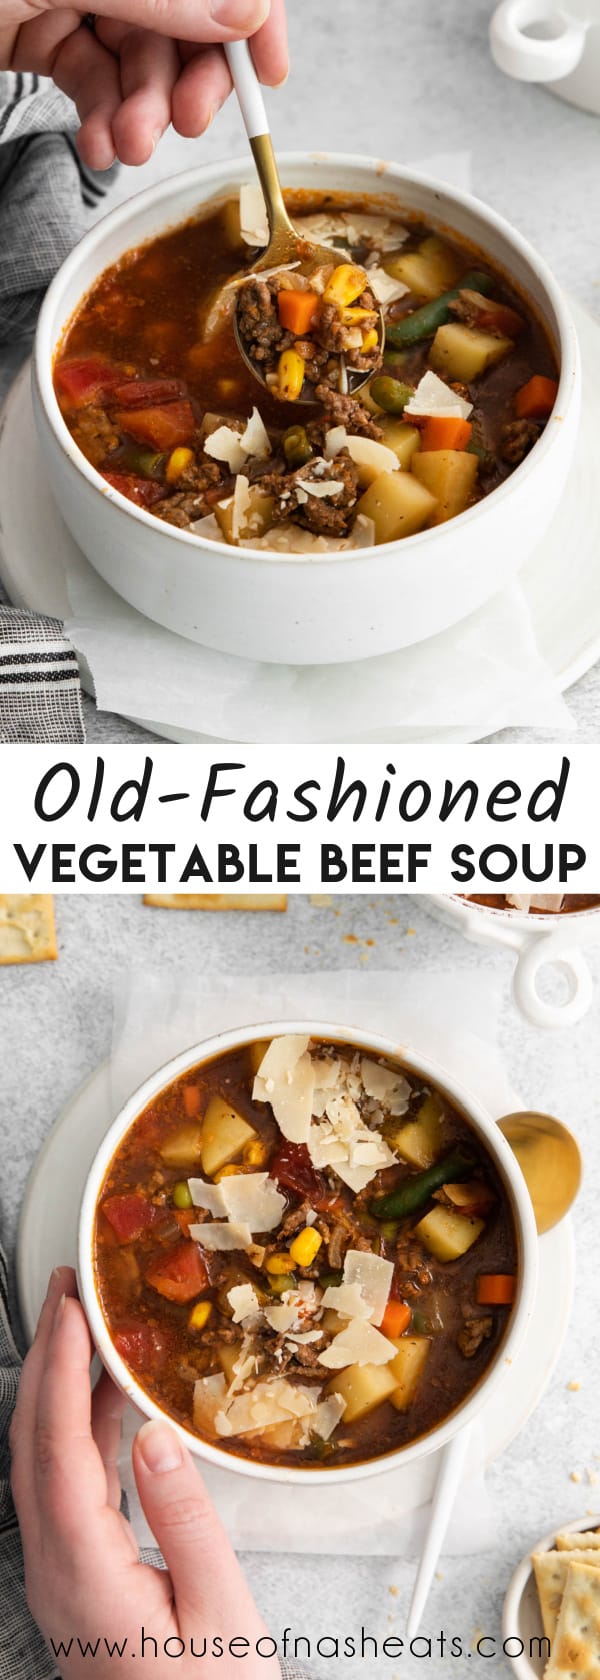 A collage of images of vegetable beef soup with text overlay.